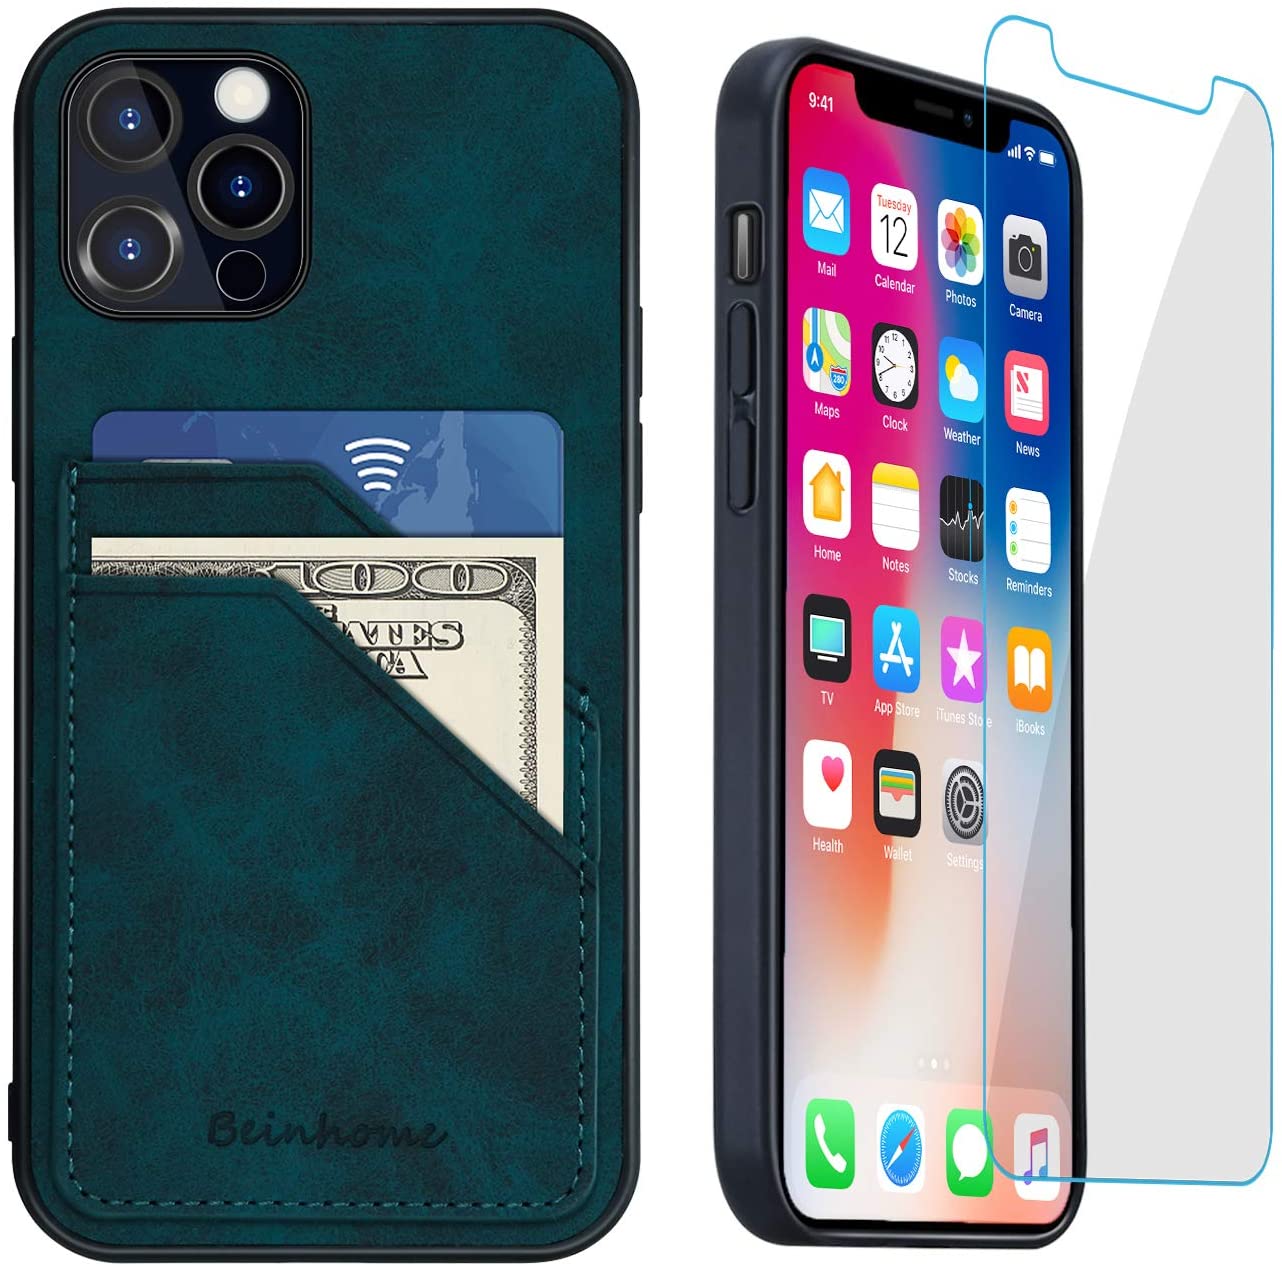 iPhone 12 Wallet Case iPhone 12 Pro Wallet Case, Leather Wallet Case Slim Credit Card Slot Holder Case with [Tempered Glass Screen Protector], Wallet Phone Case Compatible with iPhone 12/12 Pro - image 1 of 3